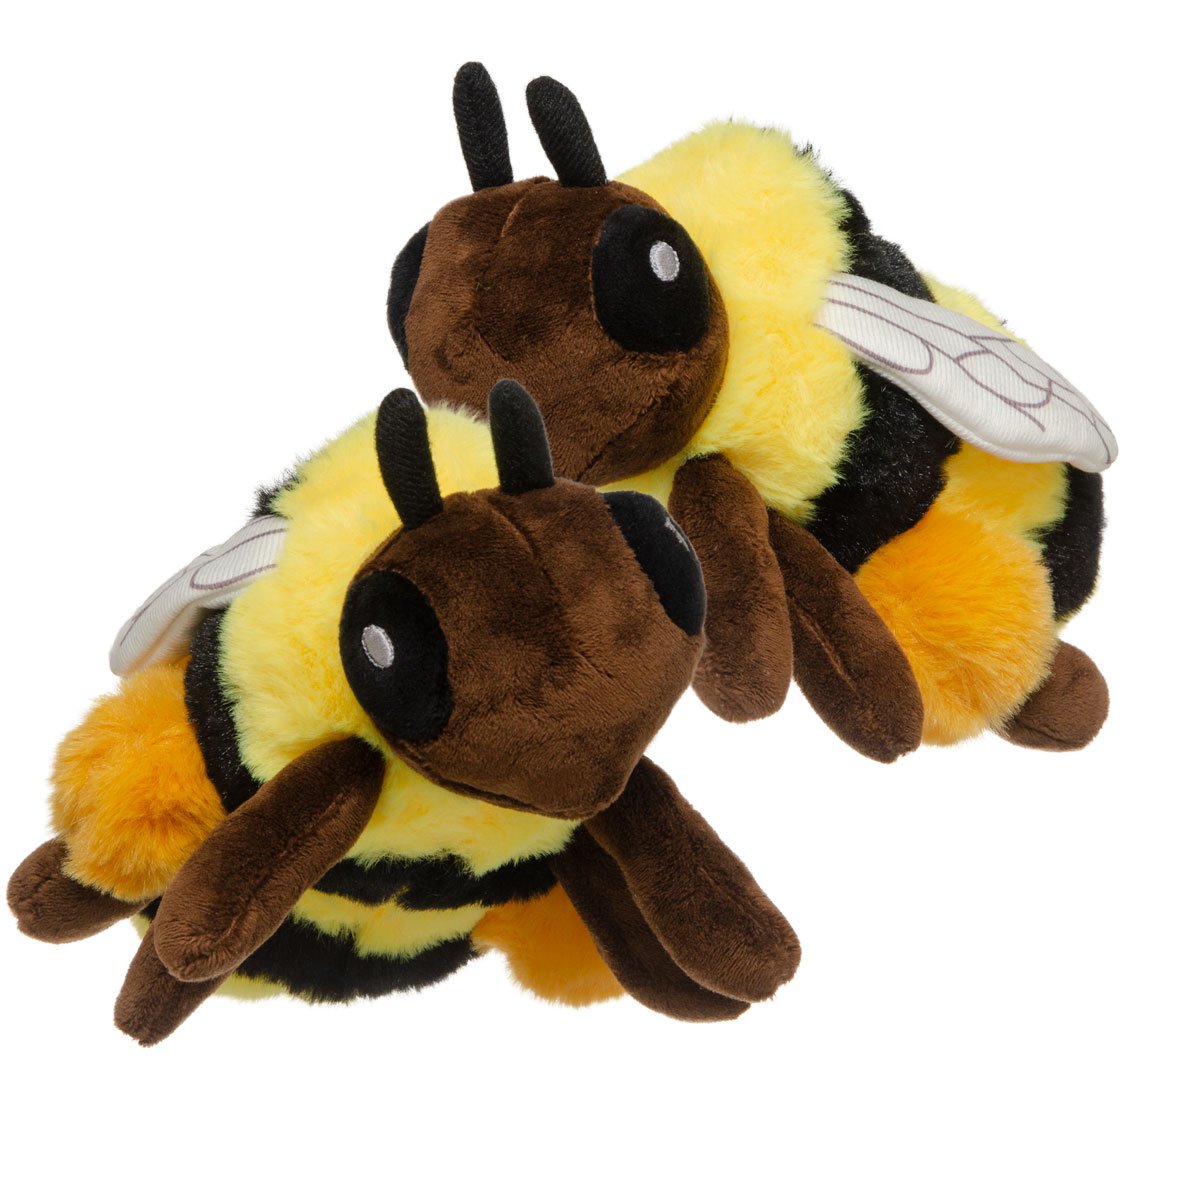 Adopt a Bee  Symbolic Adoptions from WWF